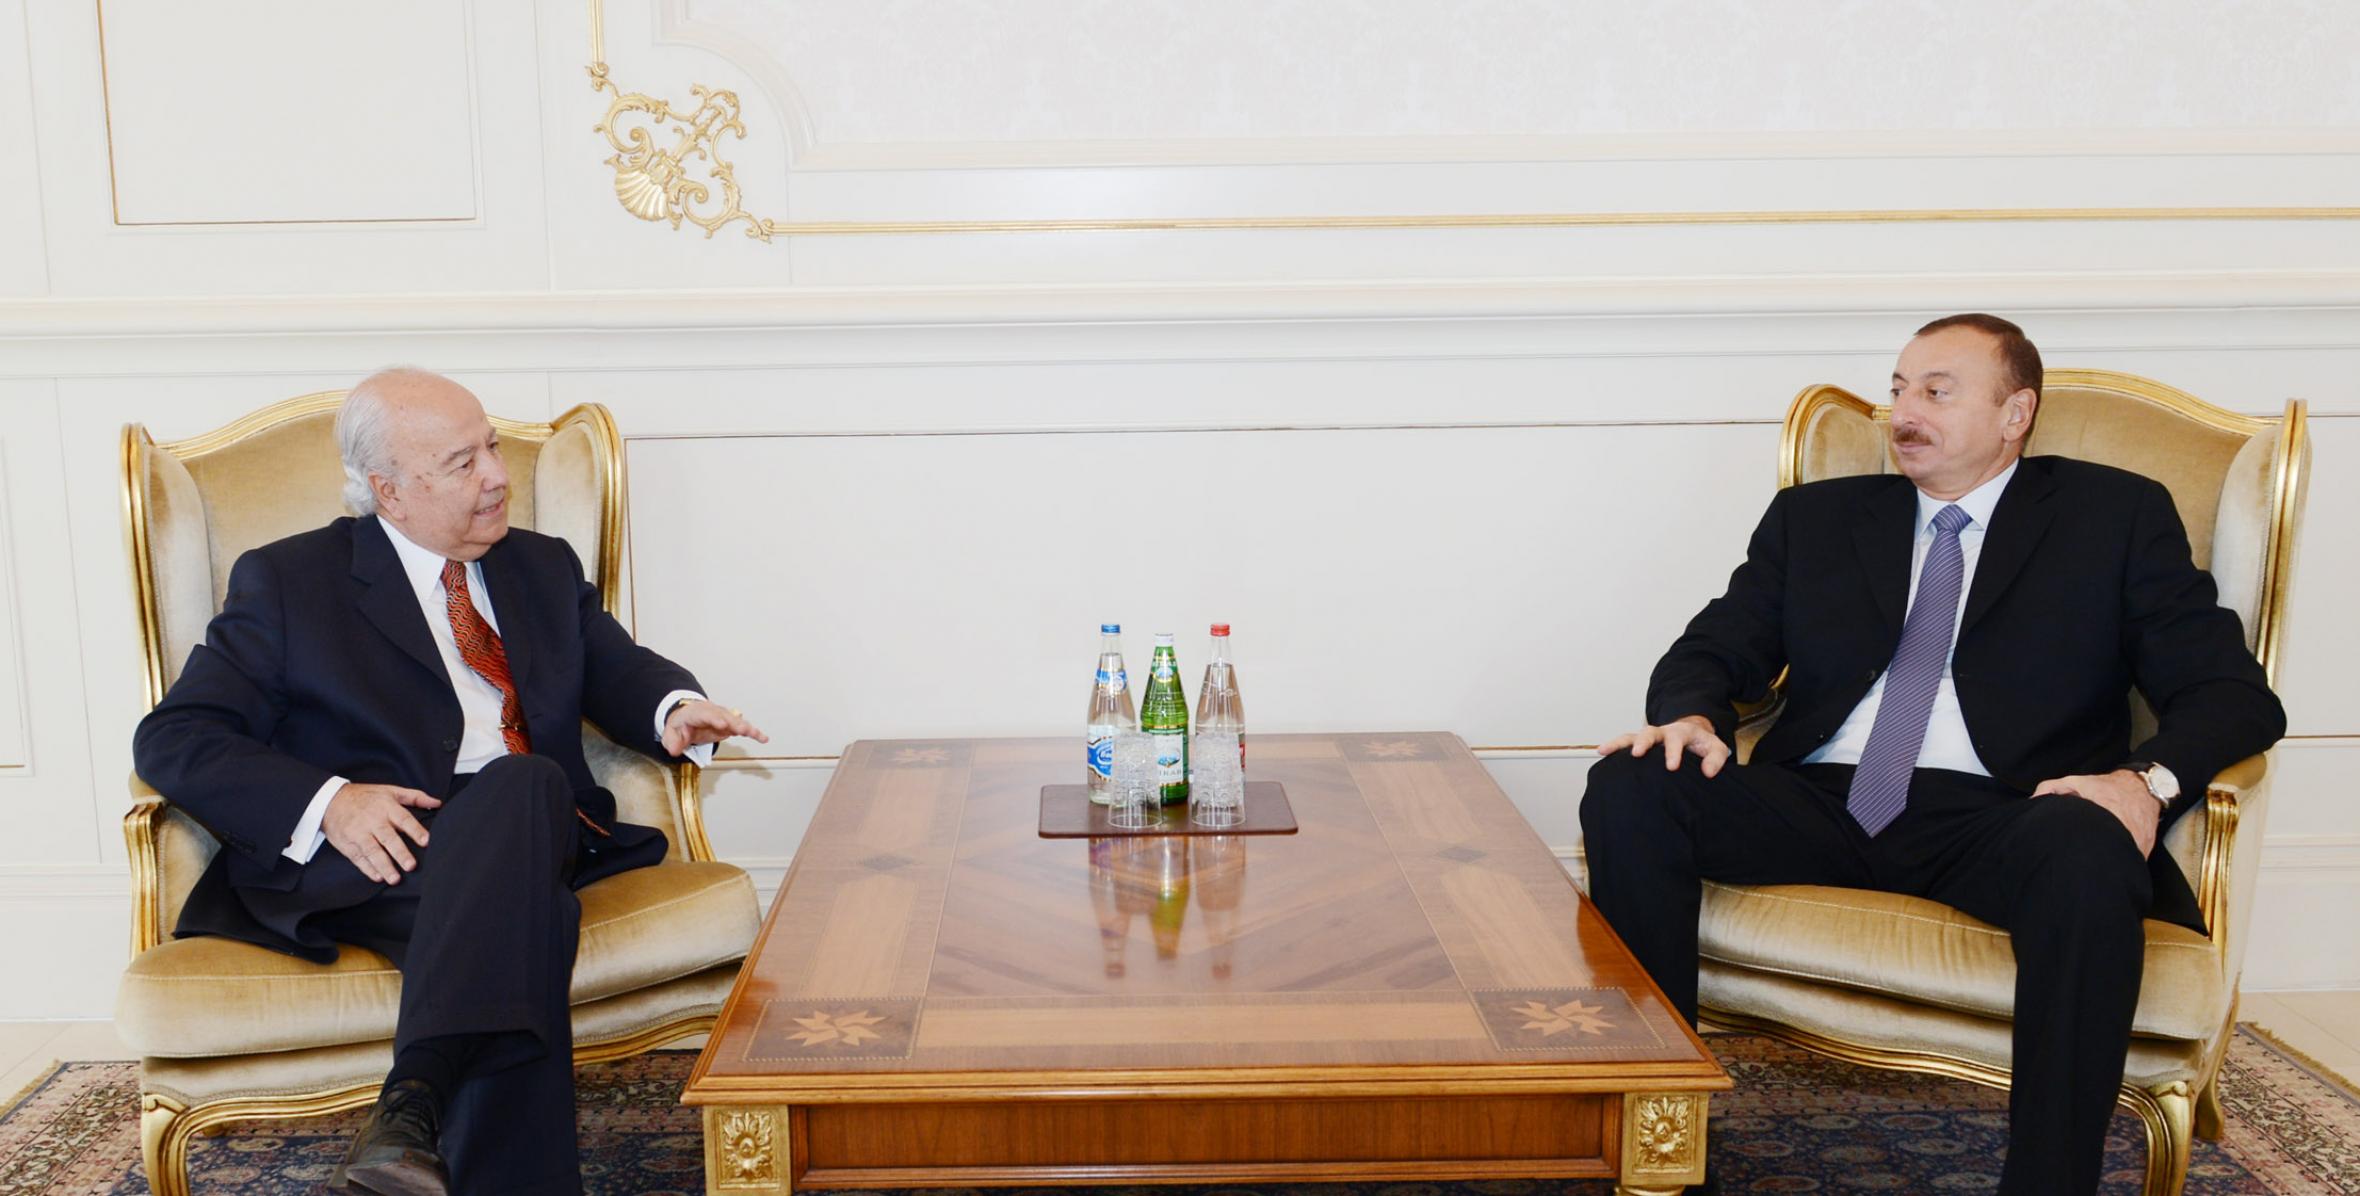 Ilham Aliyev accepted the credentials of a newly-appointed Ambassador Extraordinary and Plenipotentiary of Chile to Azerbaijan